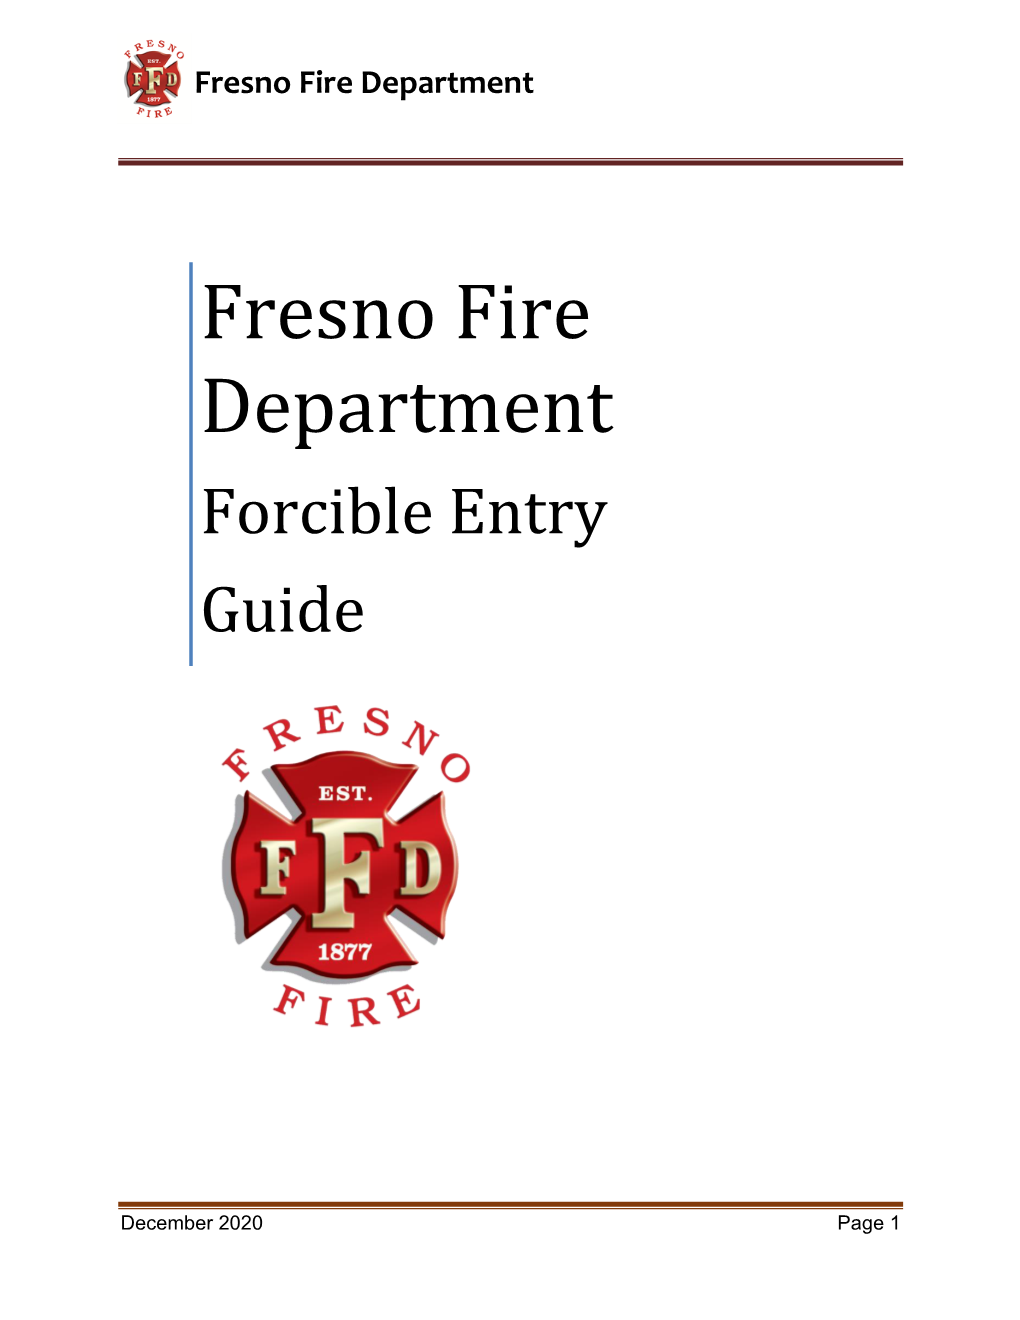 Fresno Fire Department Forcible Entry Guide